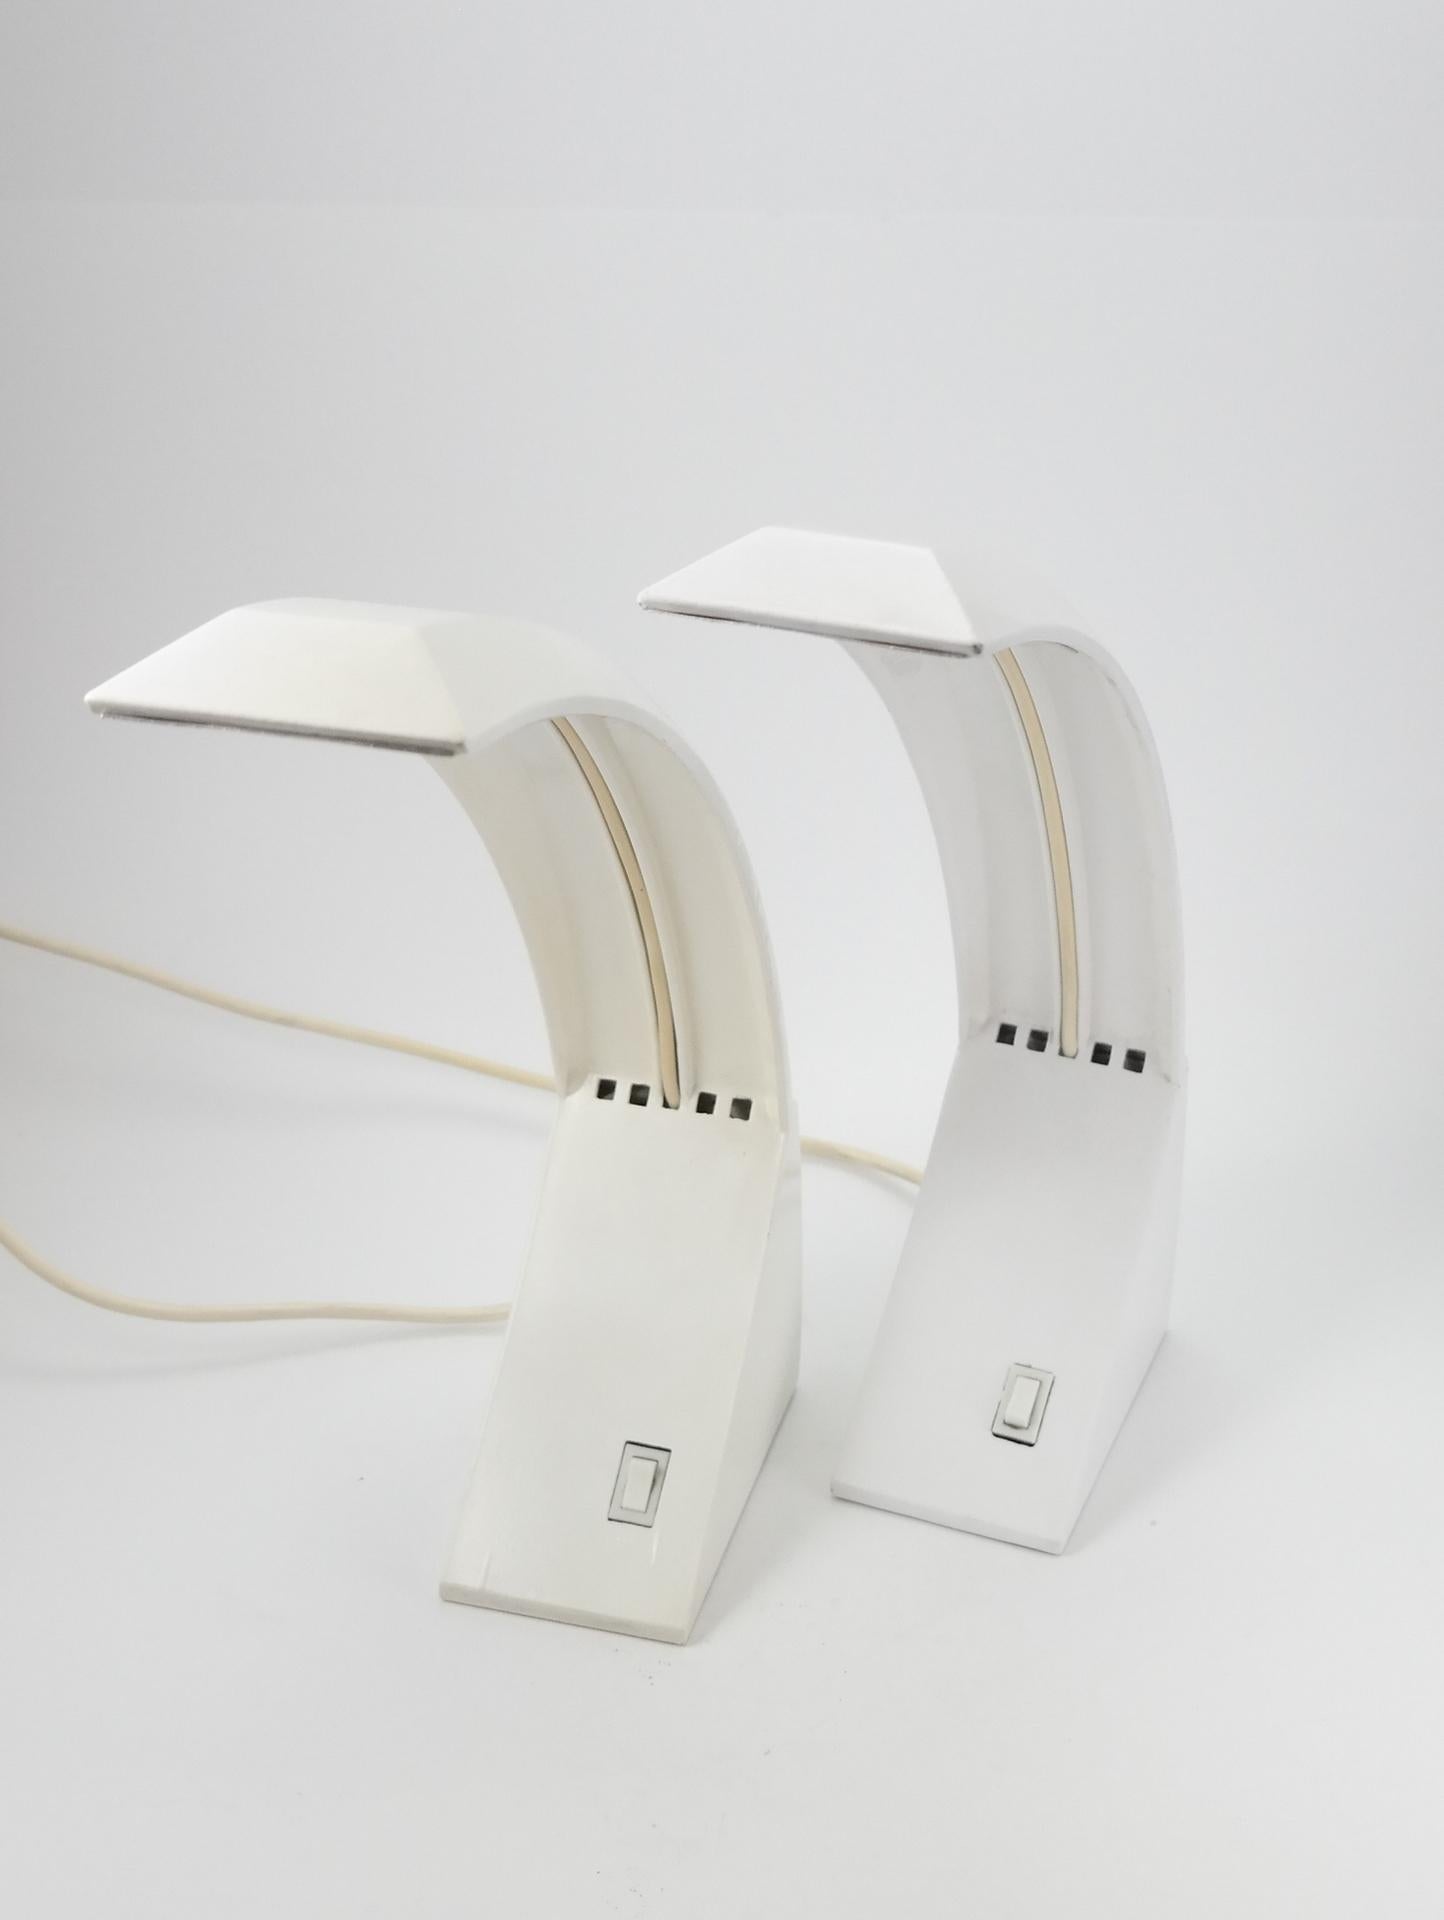 Pair of Late 20th Century Modern White Table / Desk Lamps, 1980s For Sale 3